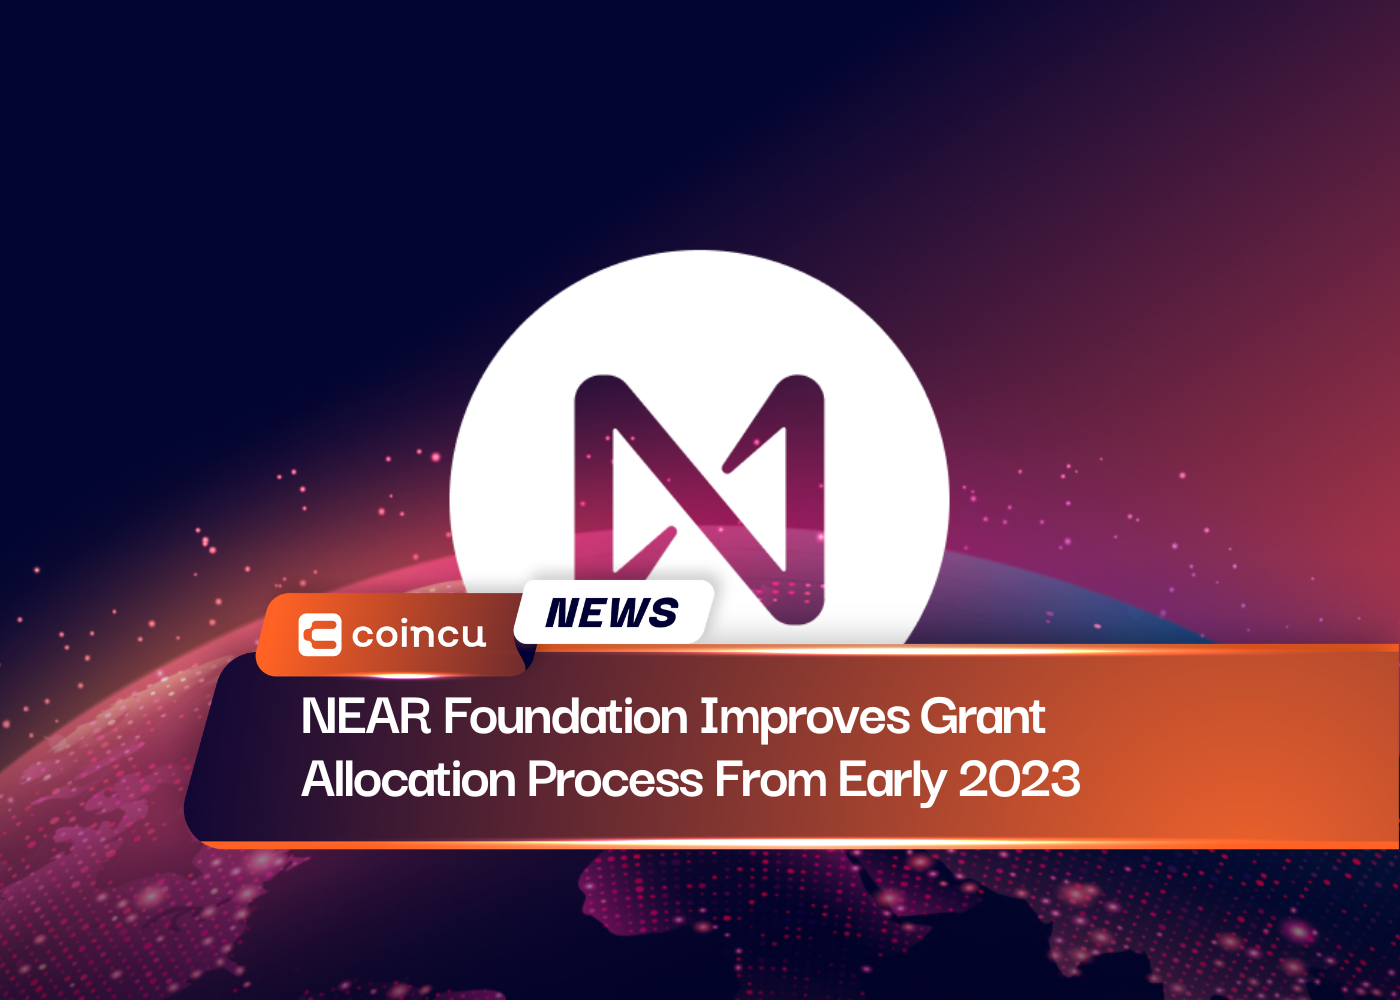 NEAR Foundation Improves Grant Allocation Process From Early 2023